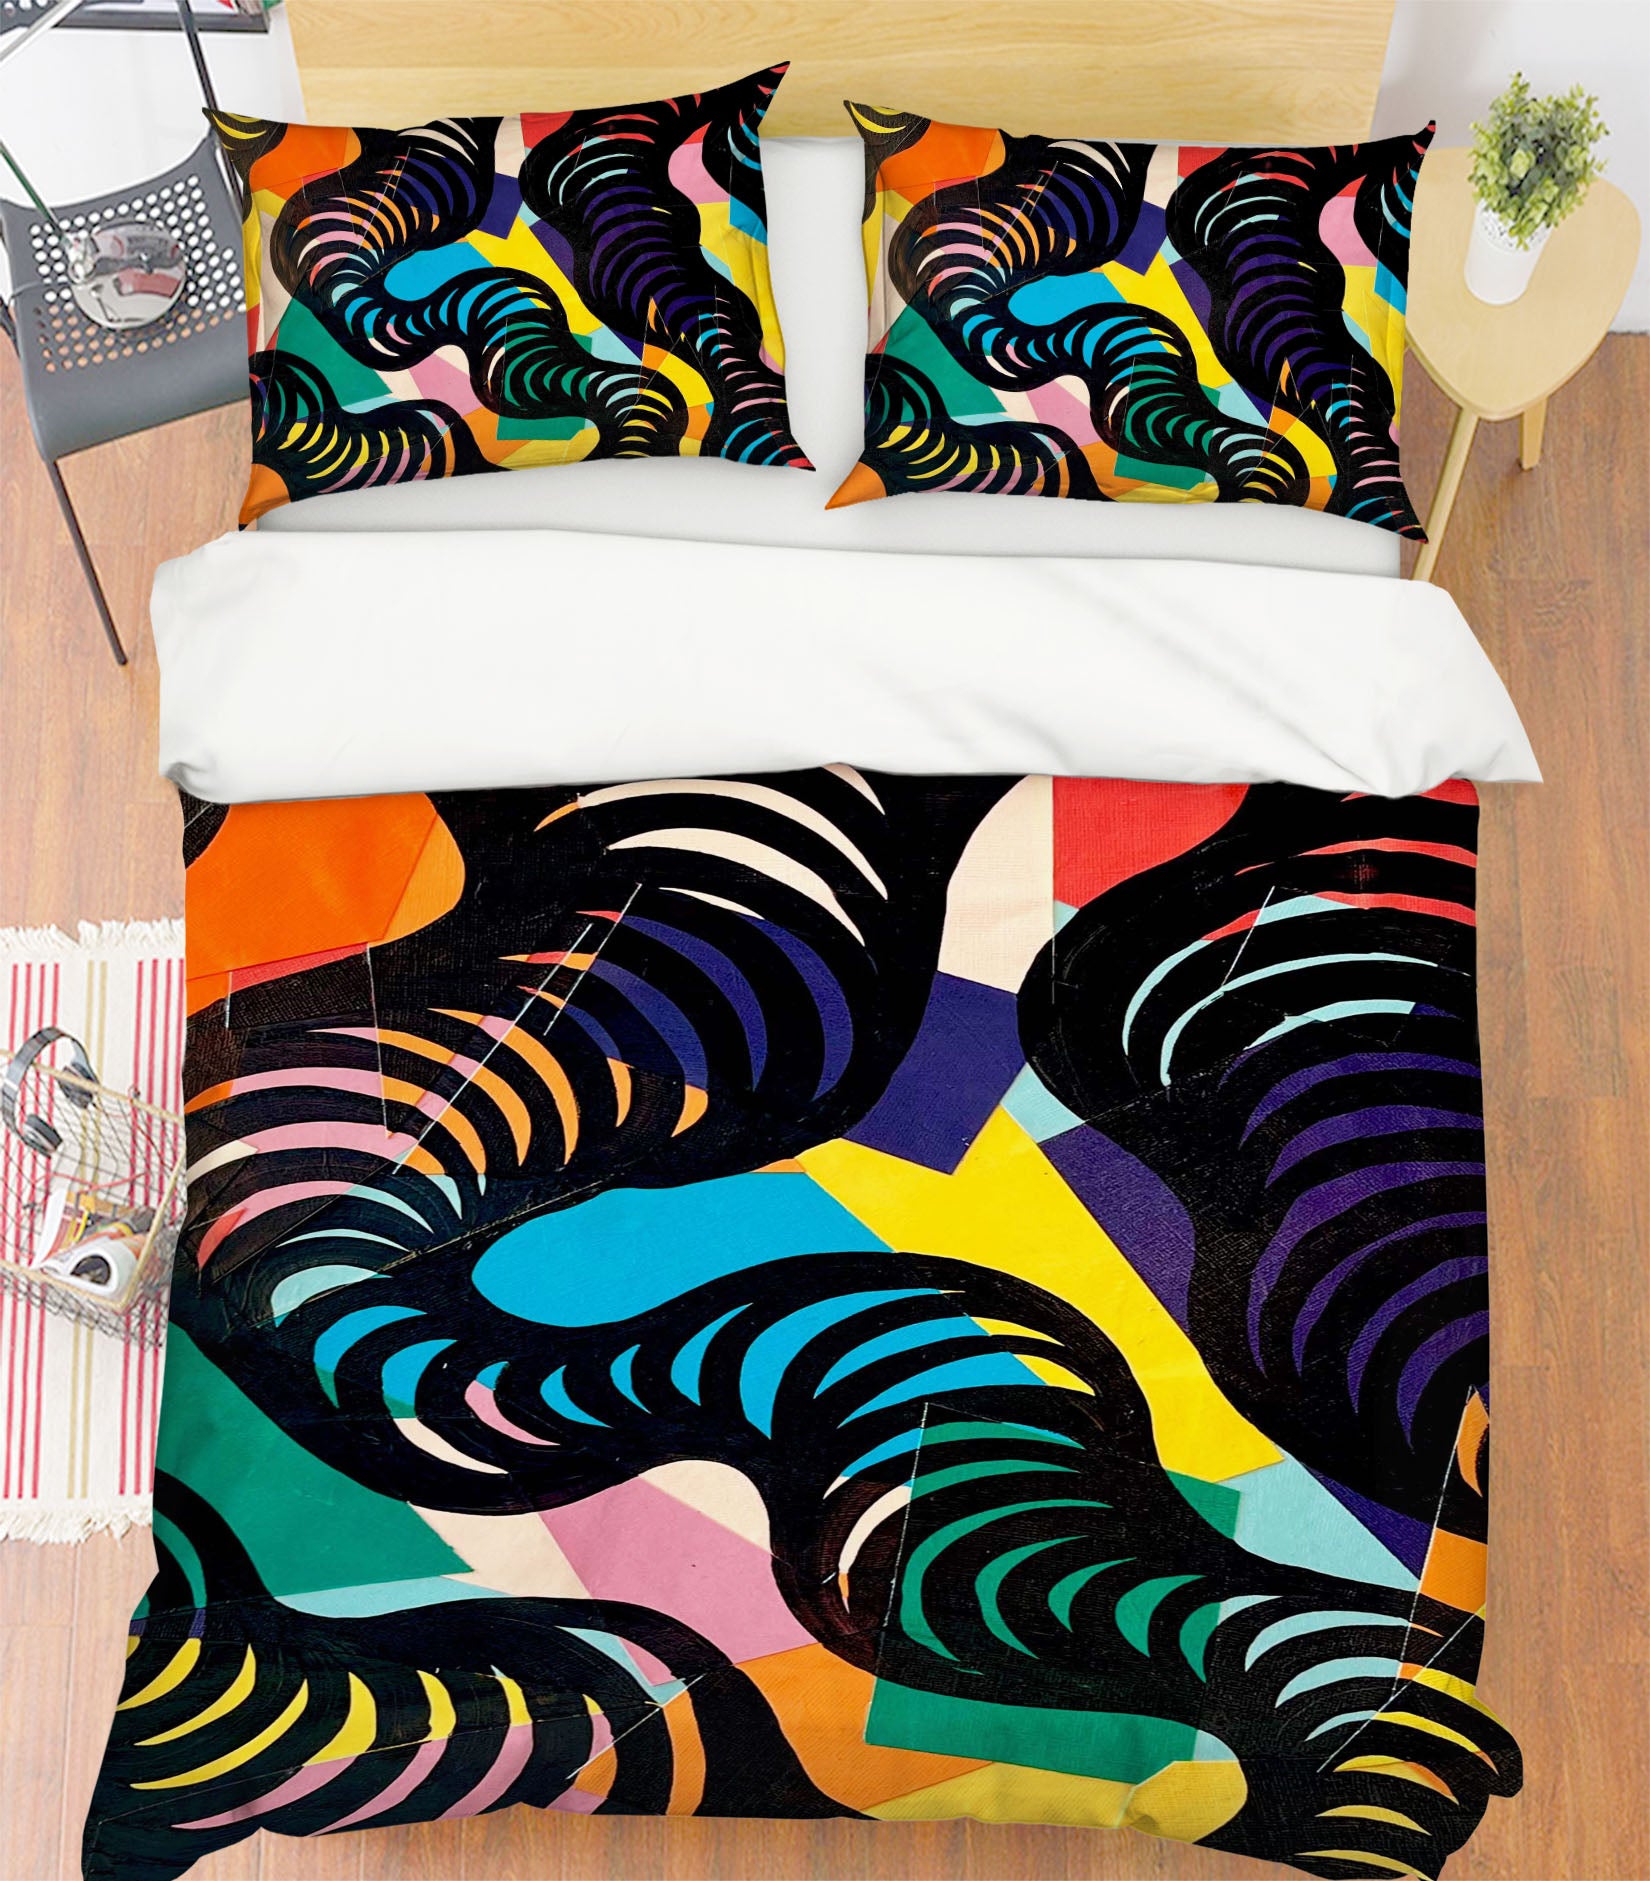 3D Color Graphics 3037 Jacqueline Reynoso Bedding Bed Pillowcases Quilt Cover Duvet Cover